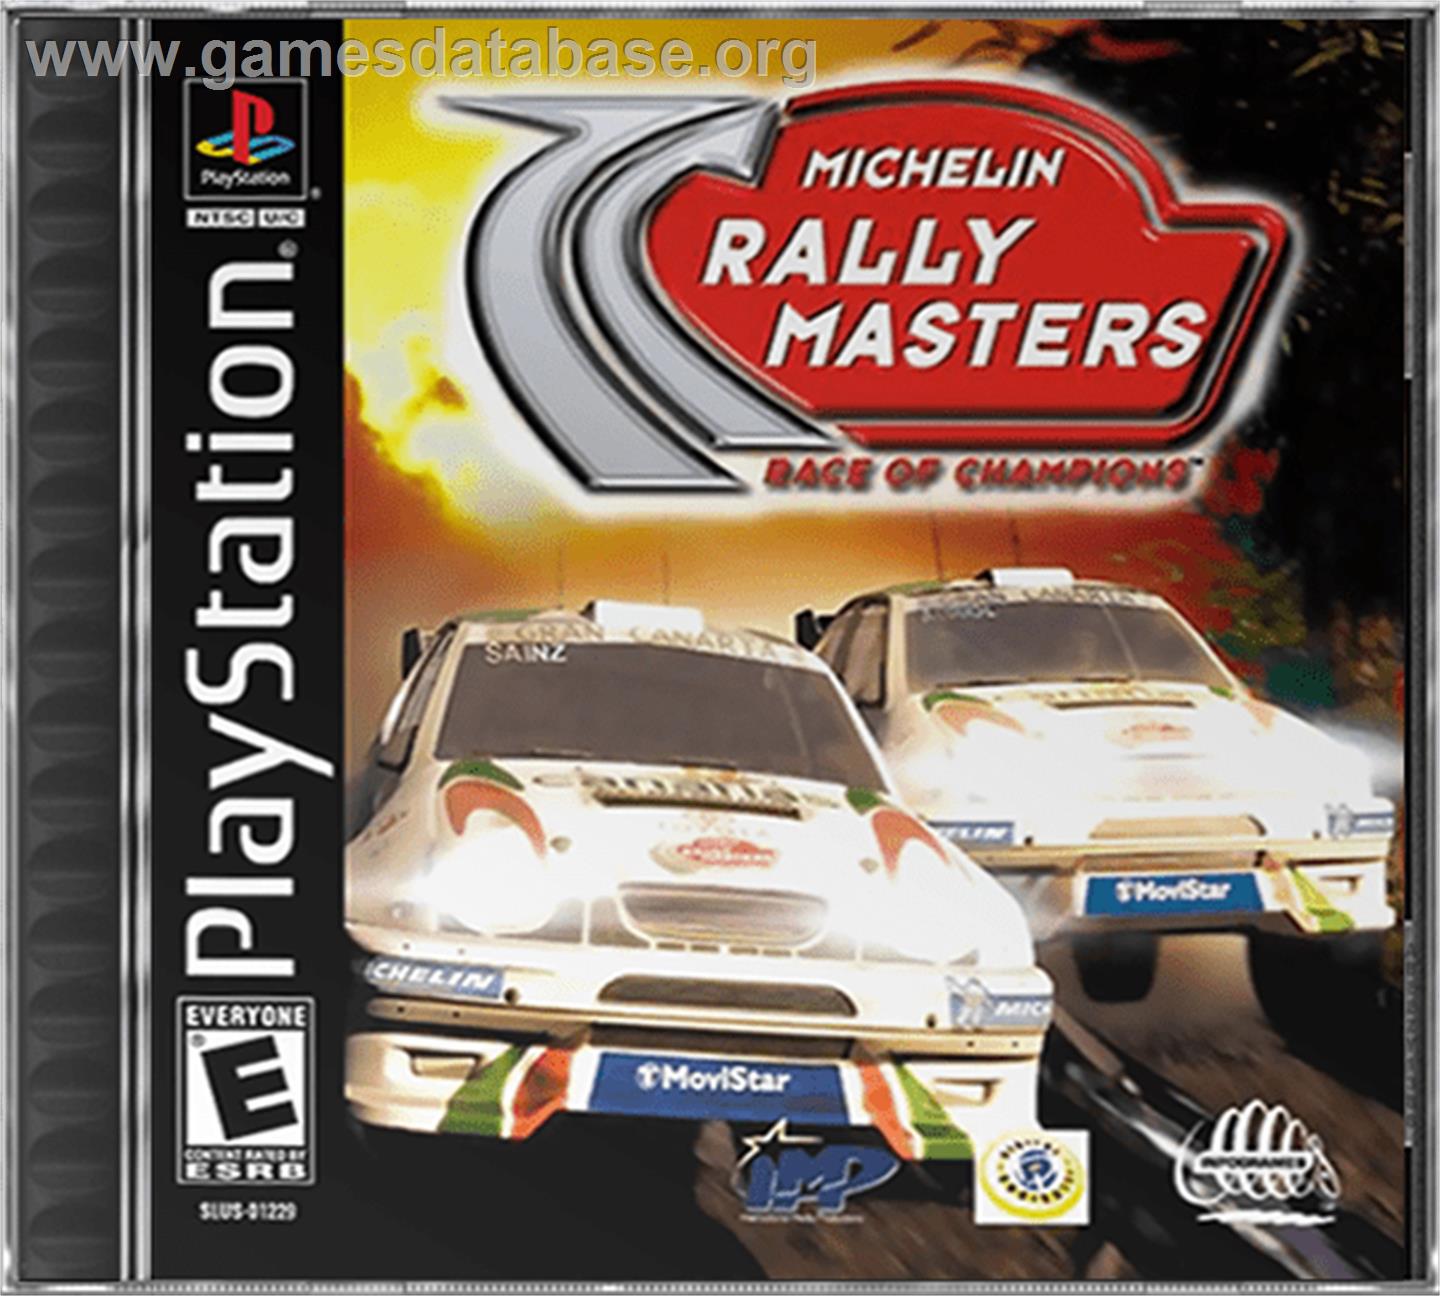 Michelin Rally Masters: Race of Champions - Sony Playstation - Artwork - Box